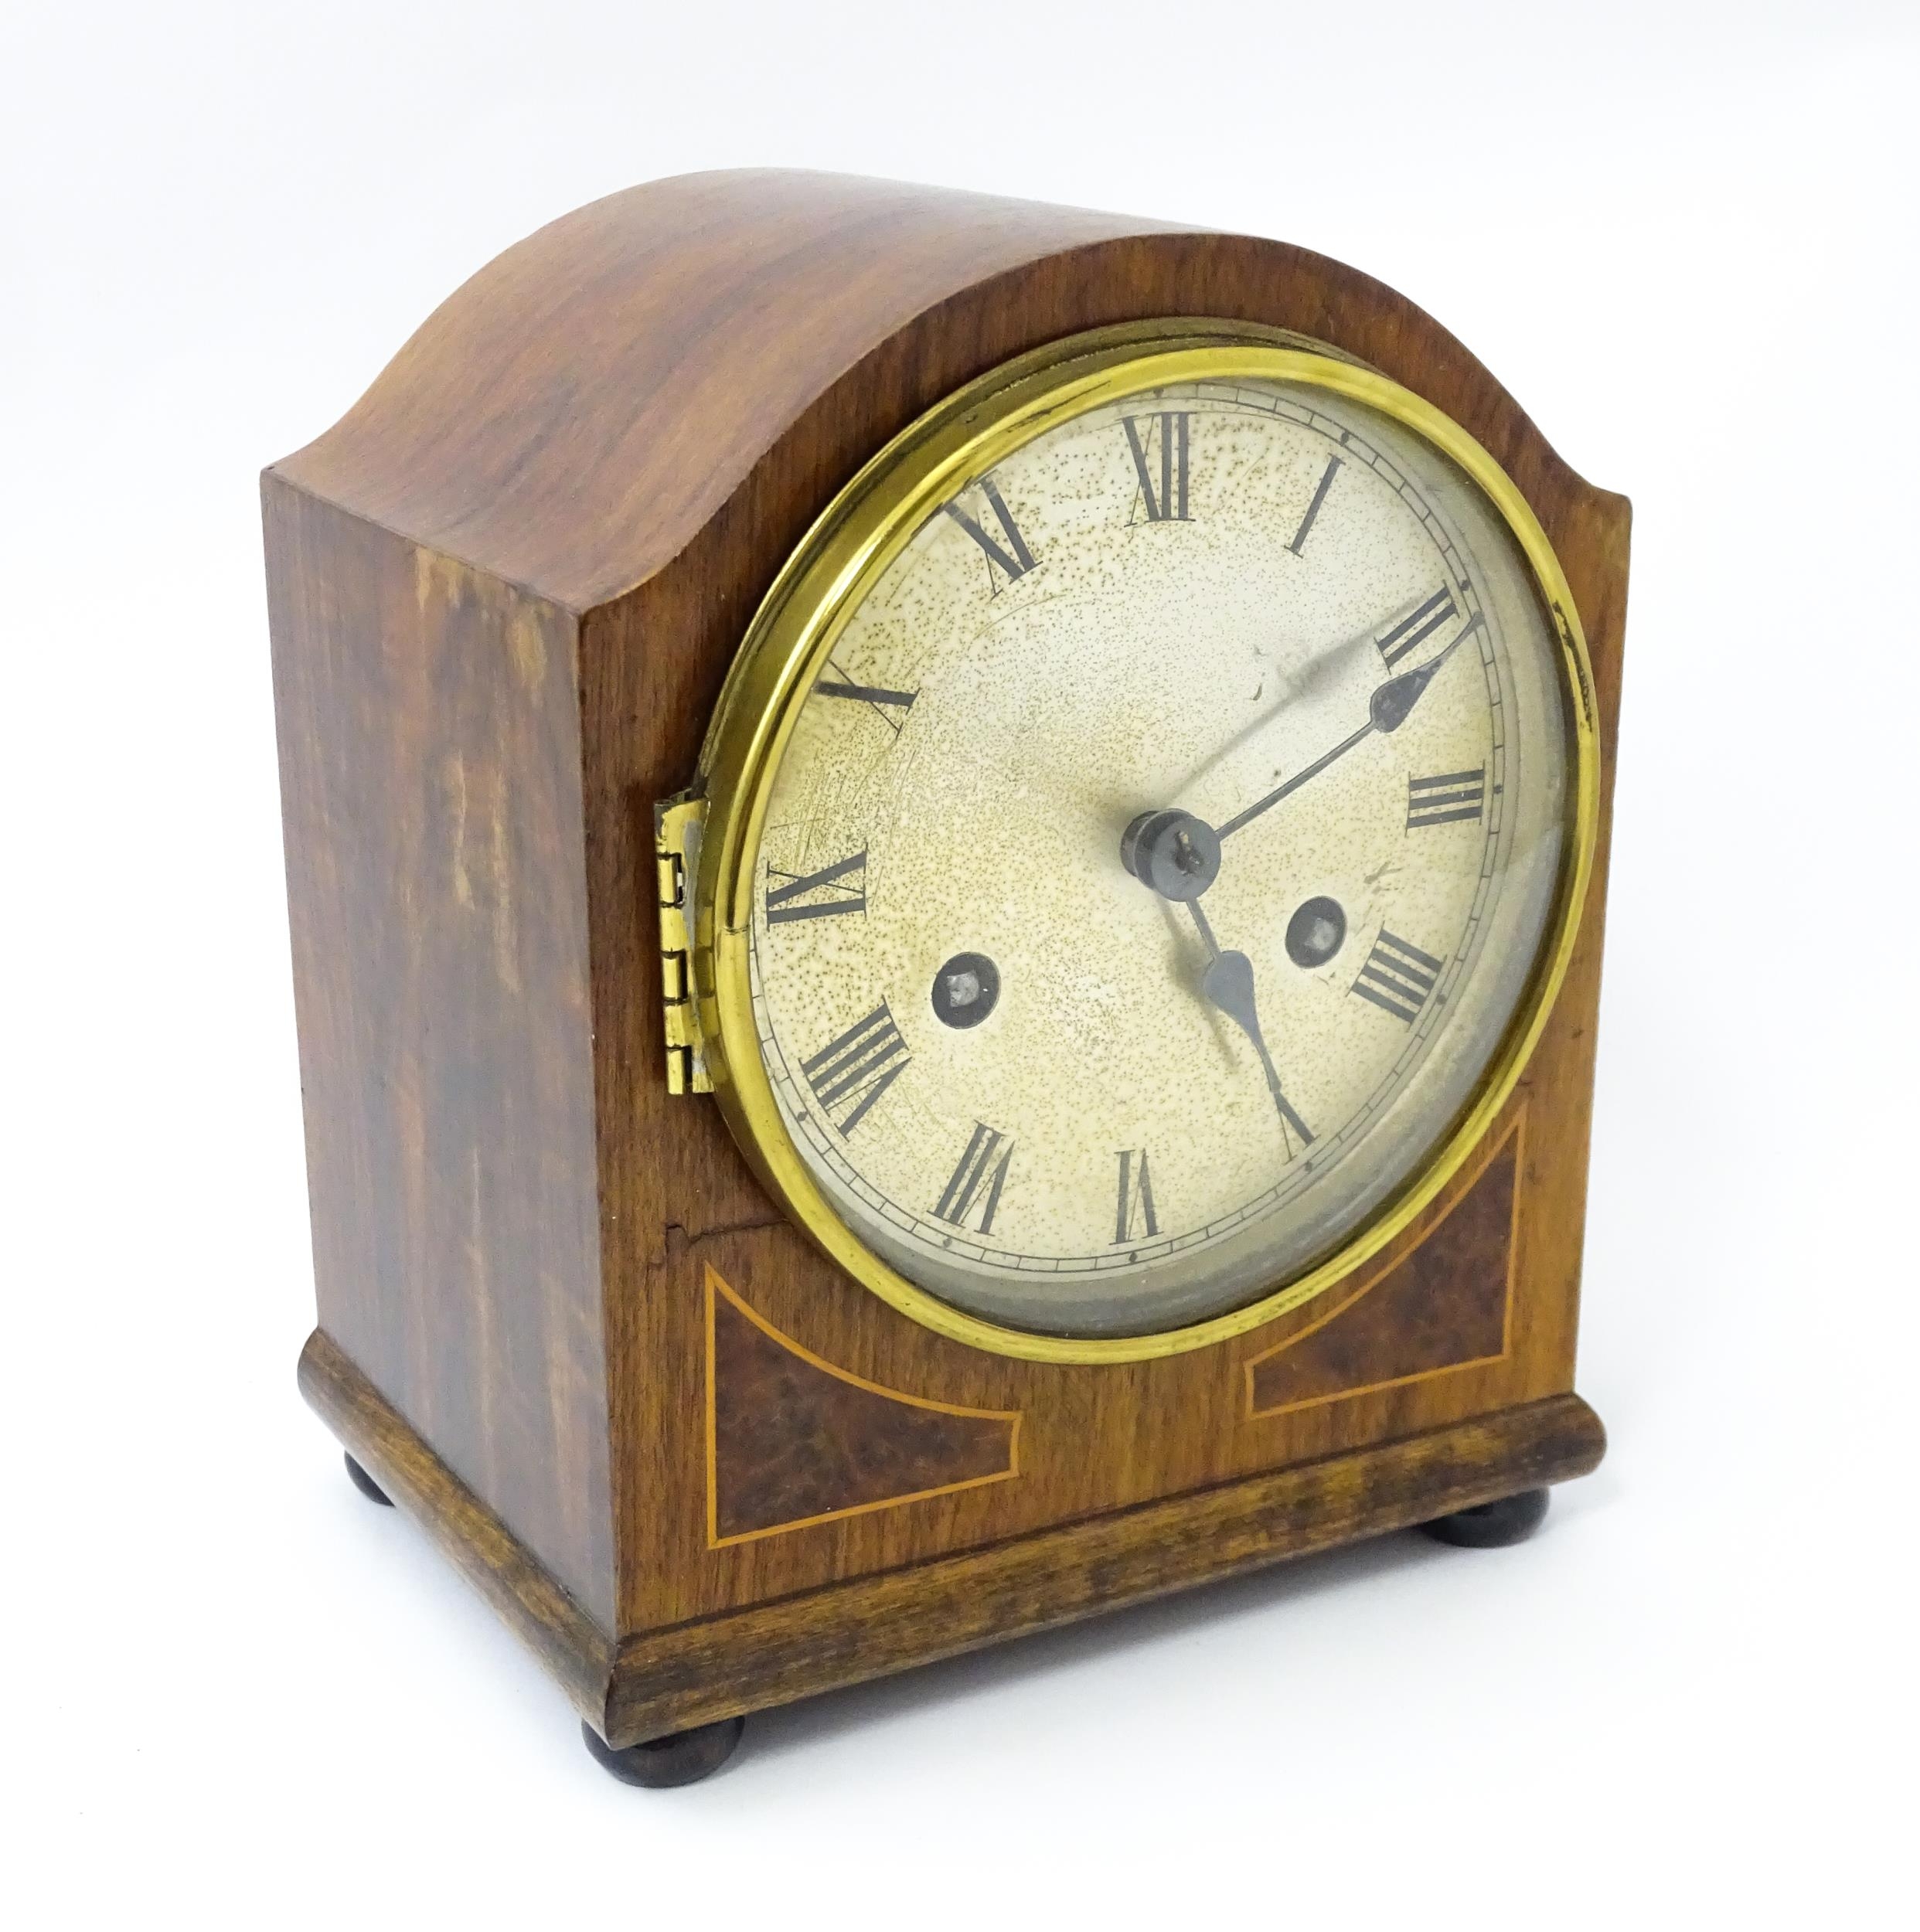 An early 20thC German walnut cased mantle clock with burr walnut veneered detail and satinwood - Image 5 of 10